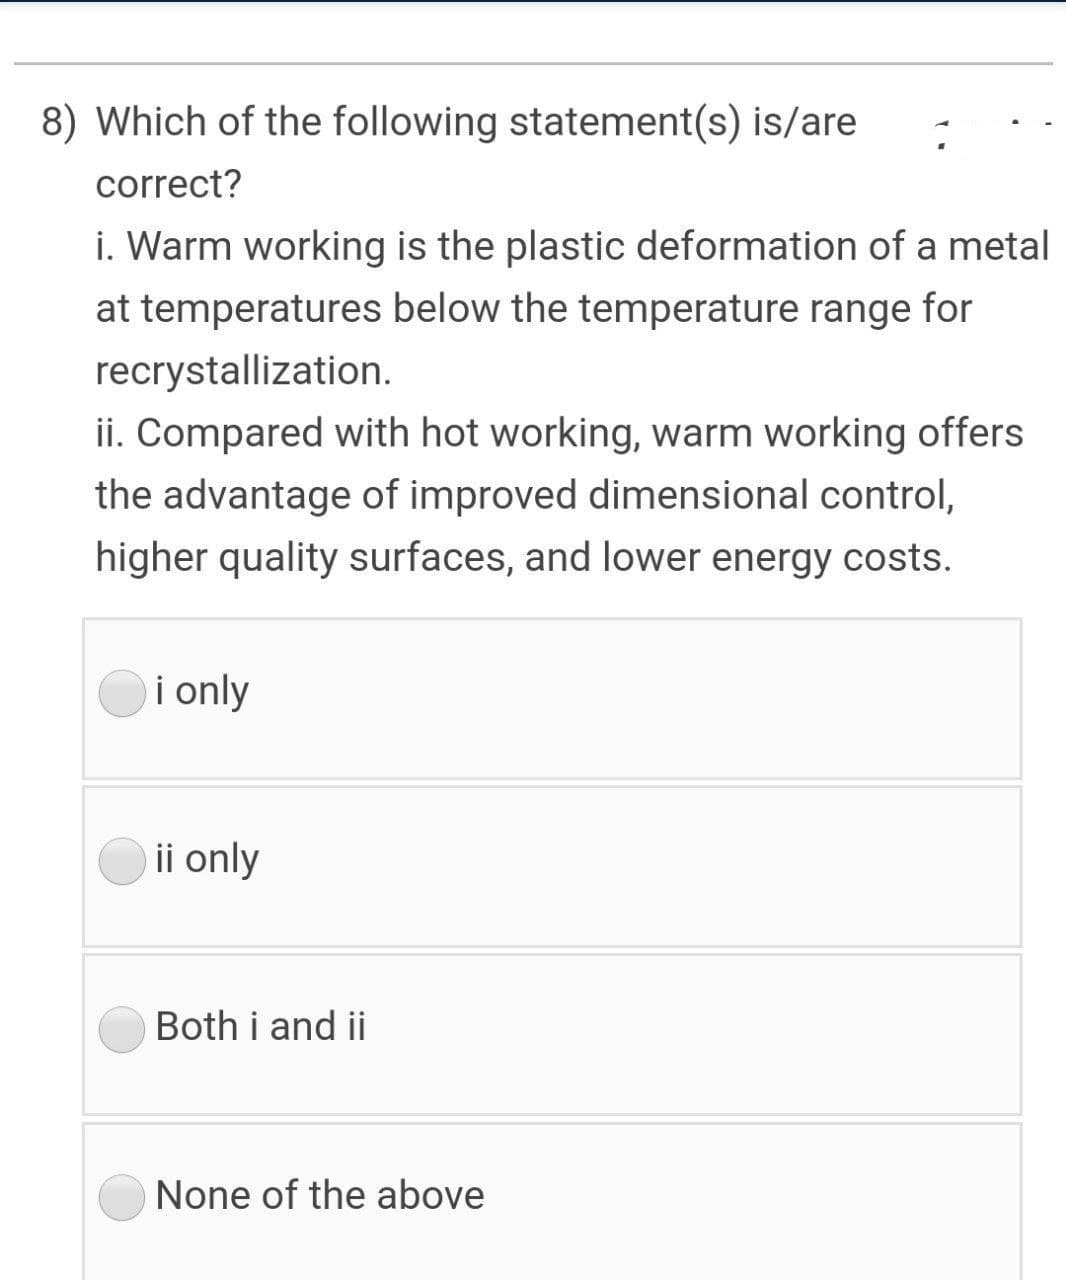 8) Which of the following statement(s) is/are
correct?
i. Warm working is the plastic deformation of a metal
at temperatures below the temperature range for
recrystallization.
ii. Compared with hot working, warm working offers
the advantage of improved dimensional control,
higher quality surfaces, and lower energy costs.
i only
ii only
Both i and ii
None of the above
